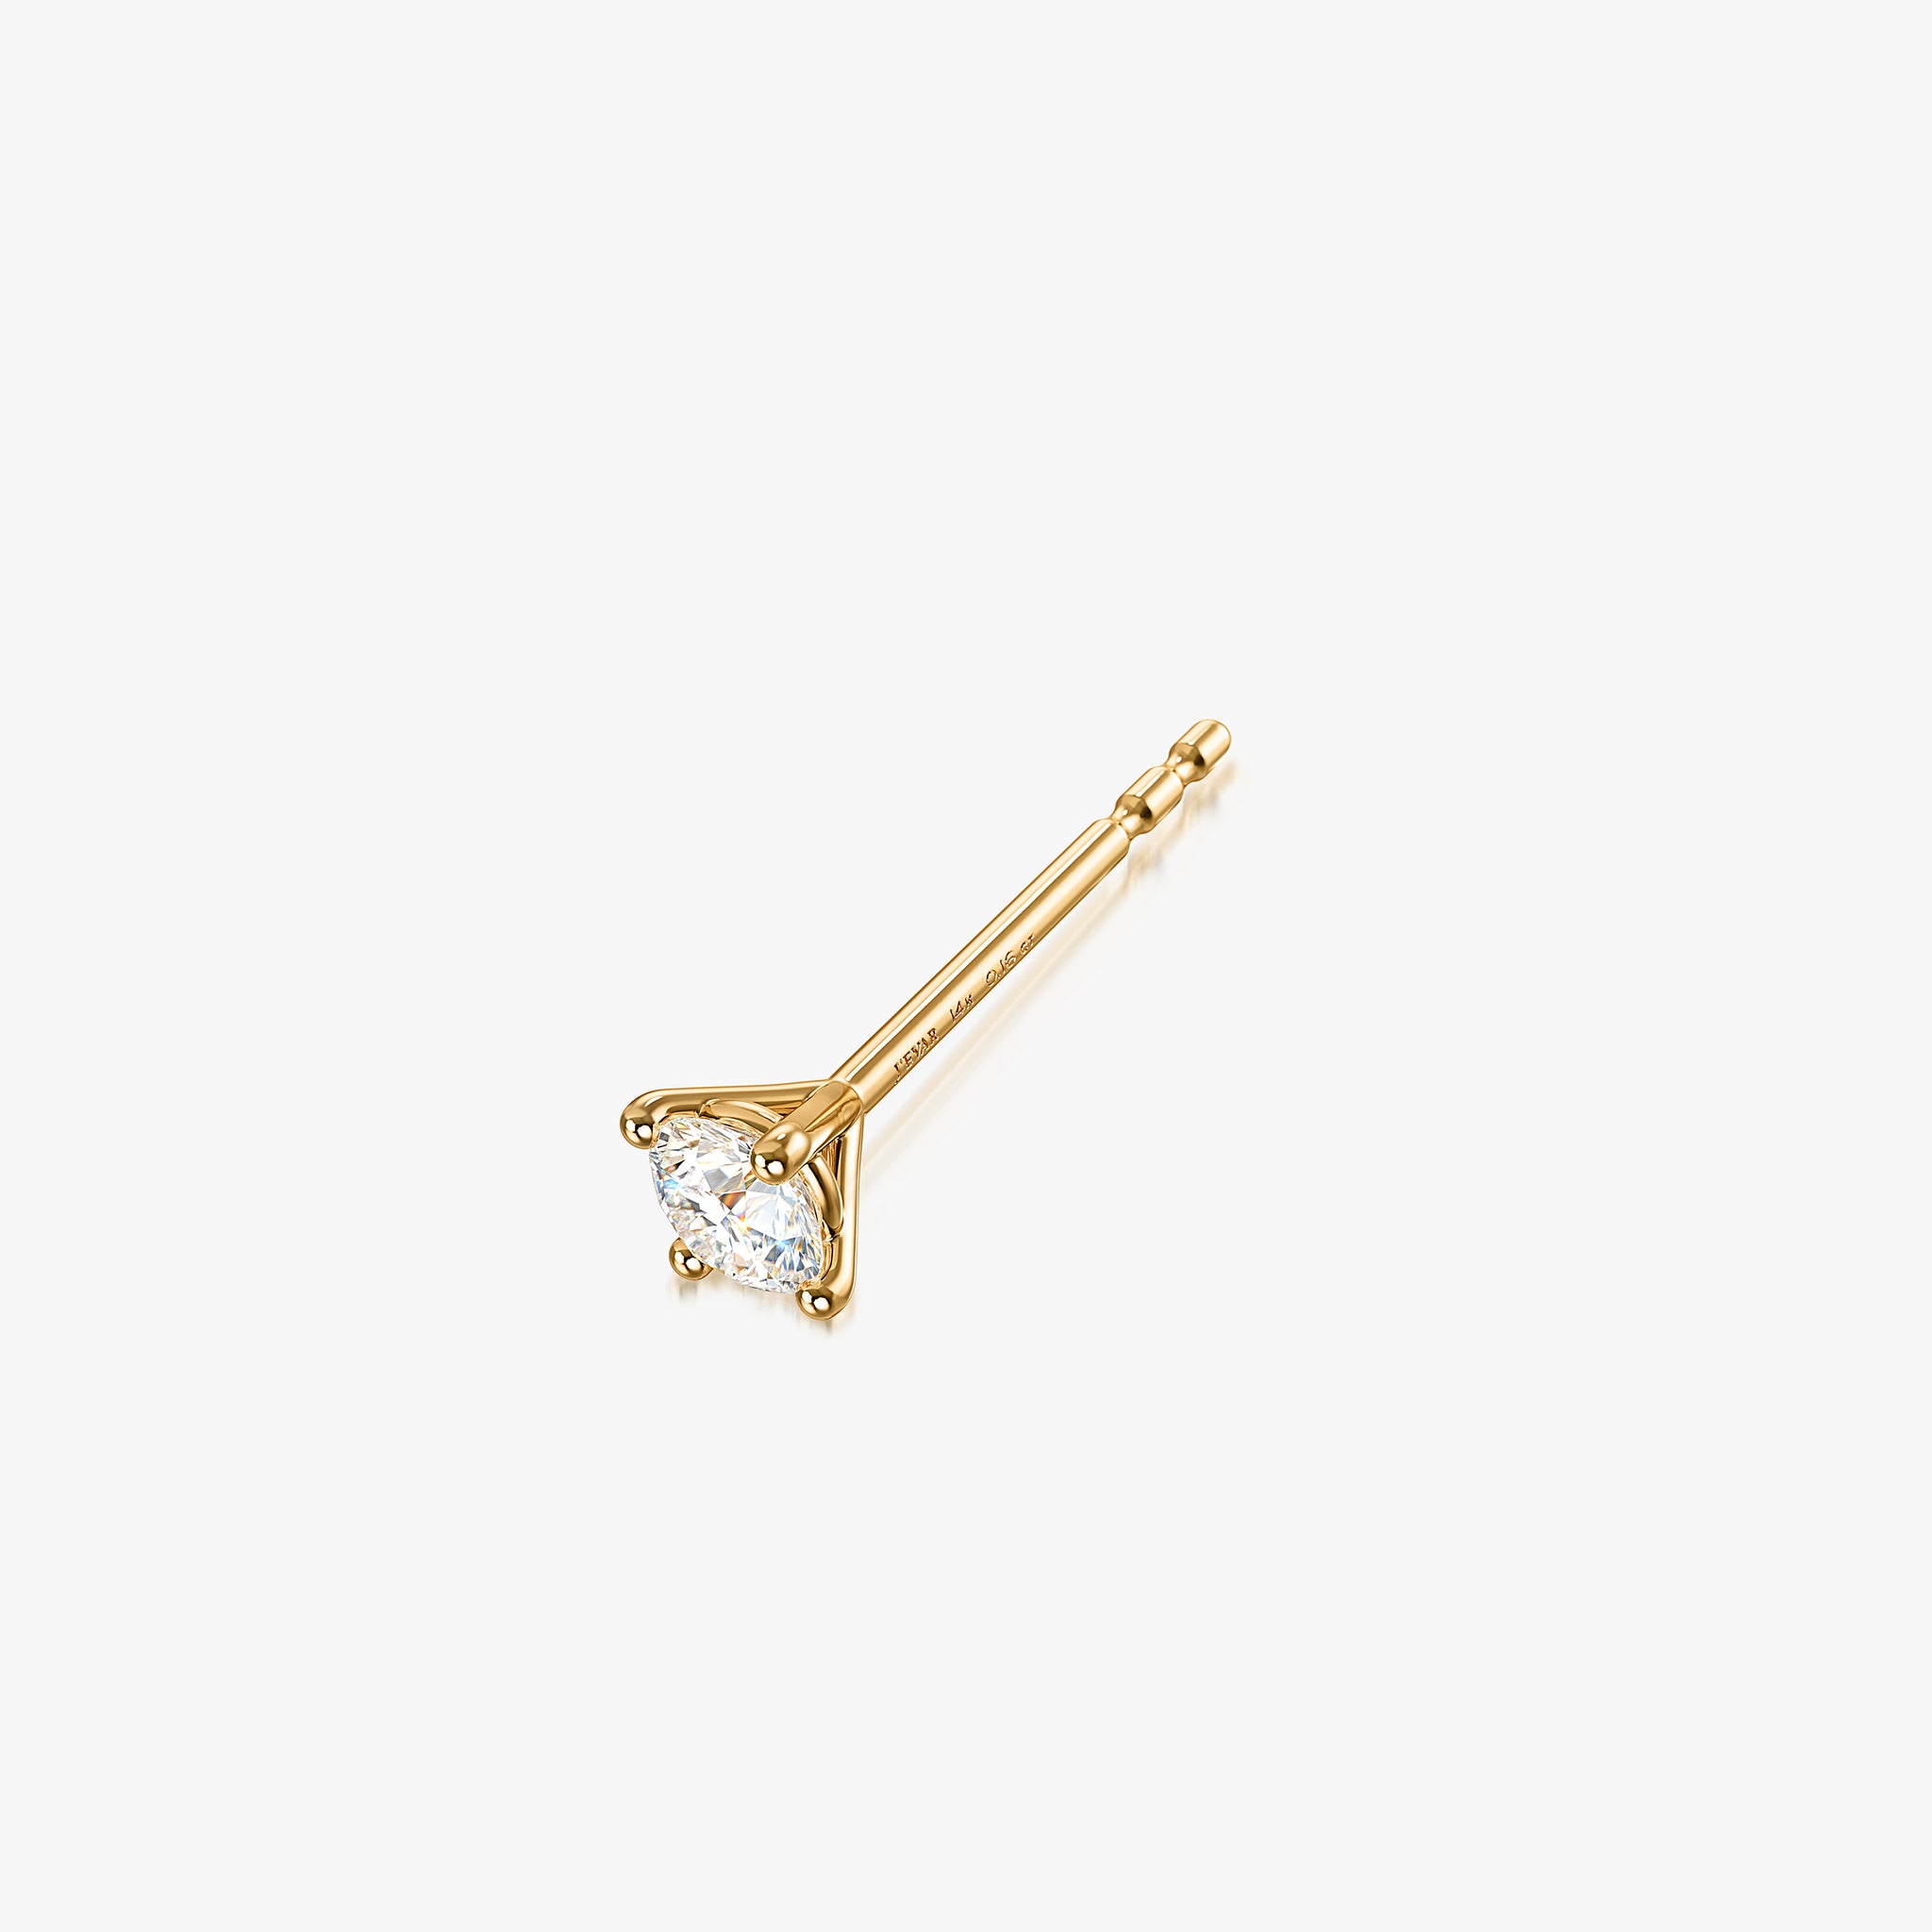 J'EVAR 14KT Yellow Gold ALTR Lab Grown Diamond Stud Earrings Perspective View